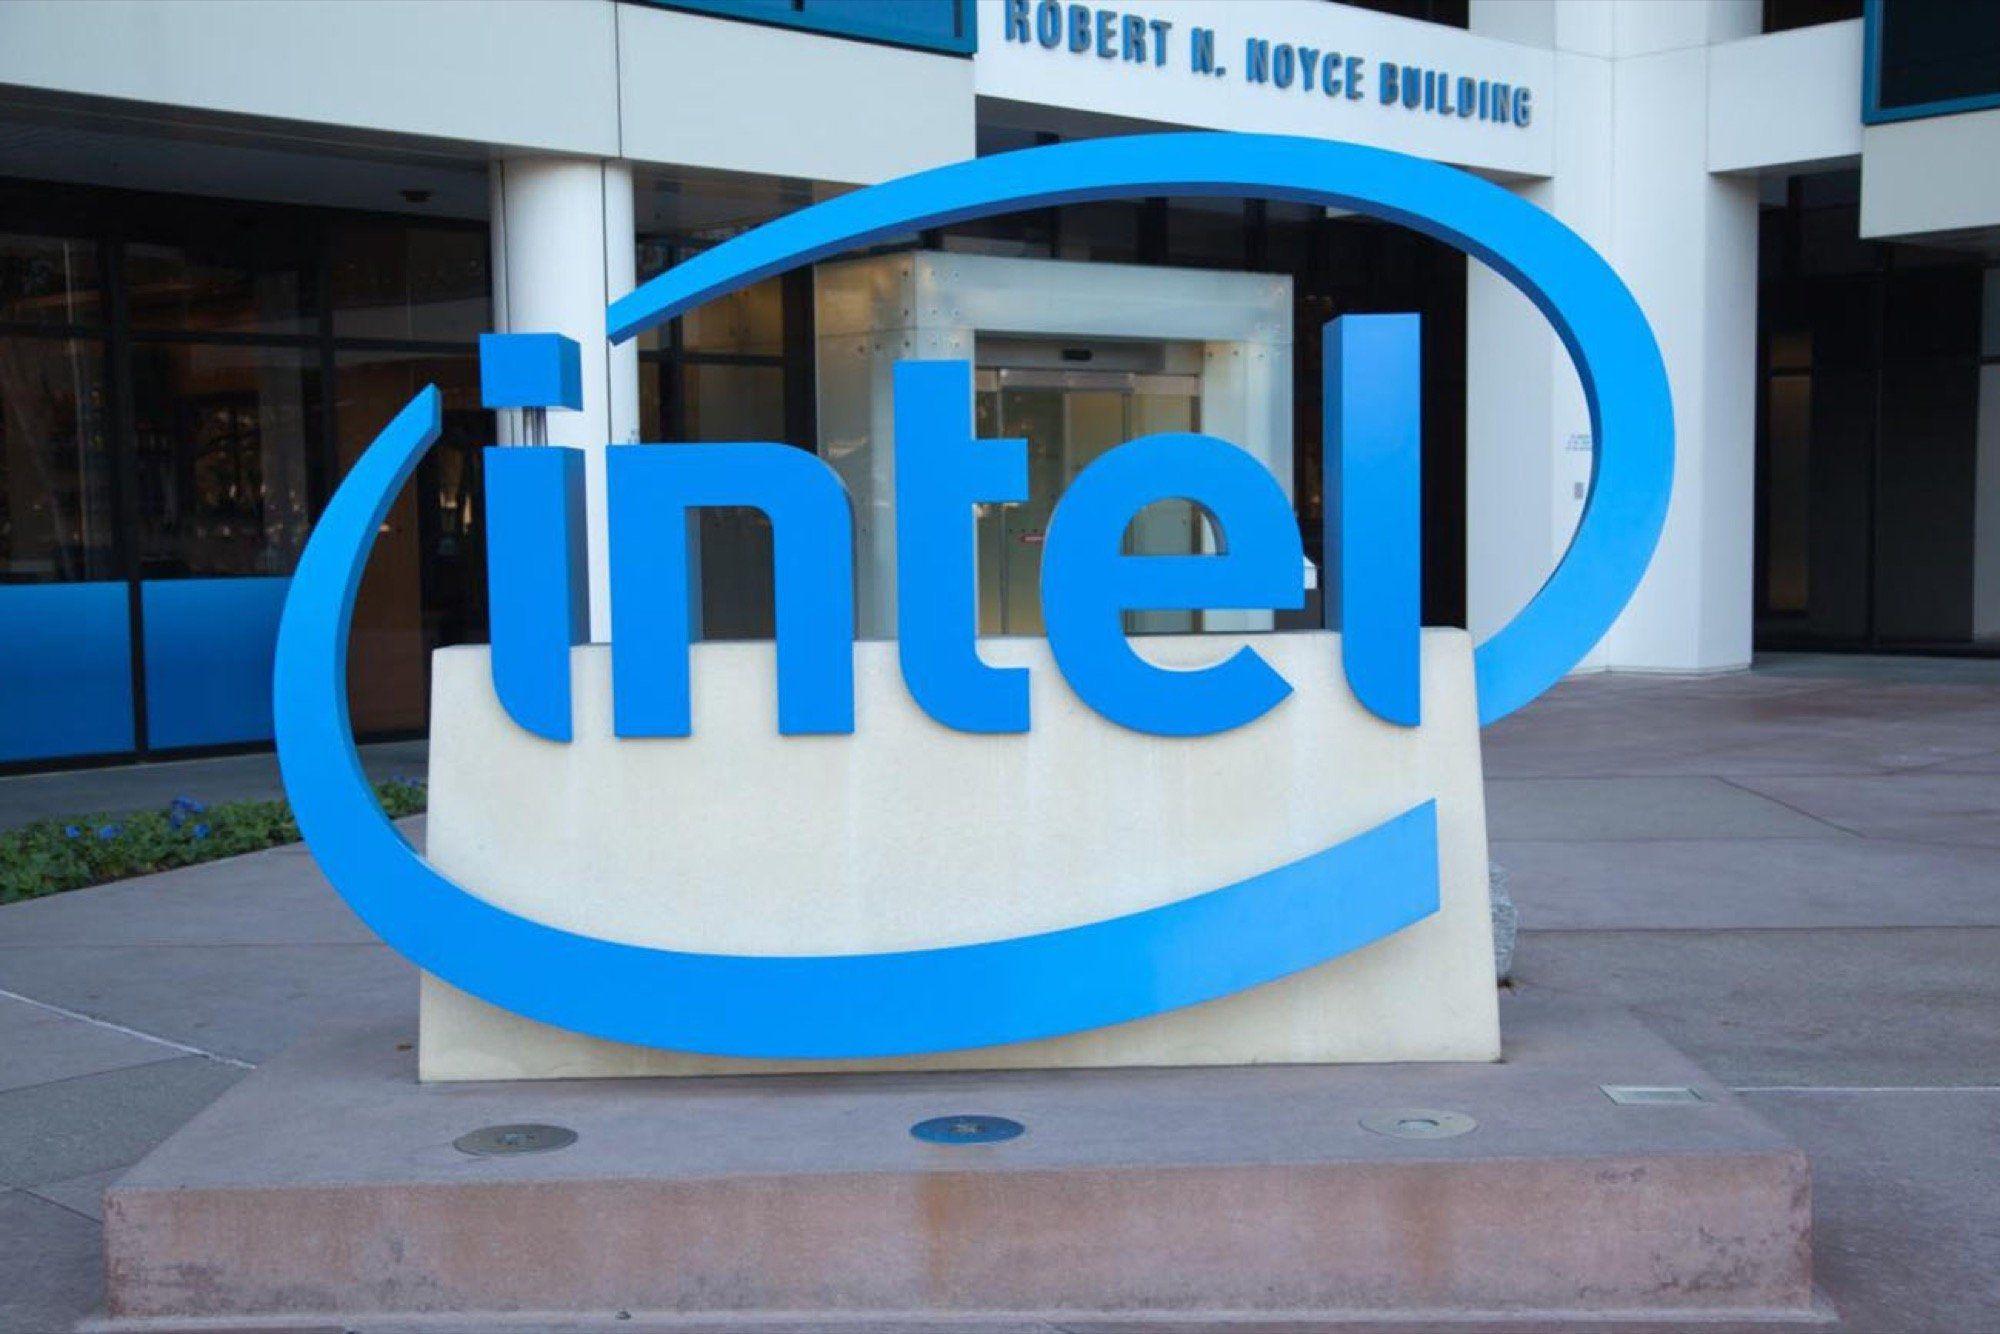 Building with Old Intel Logo - This 13-Year-Old Entrepreneur Just Landed Funding From Intel